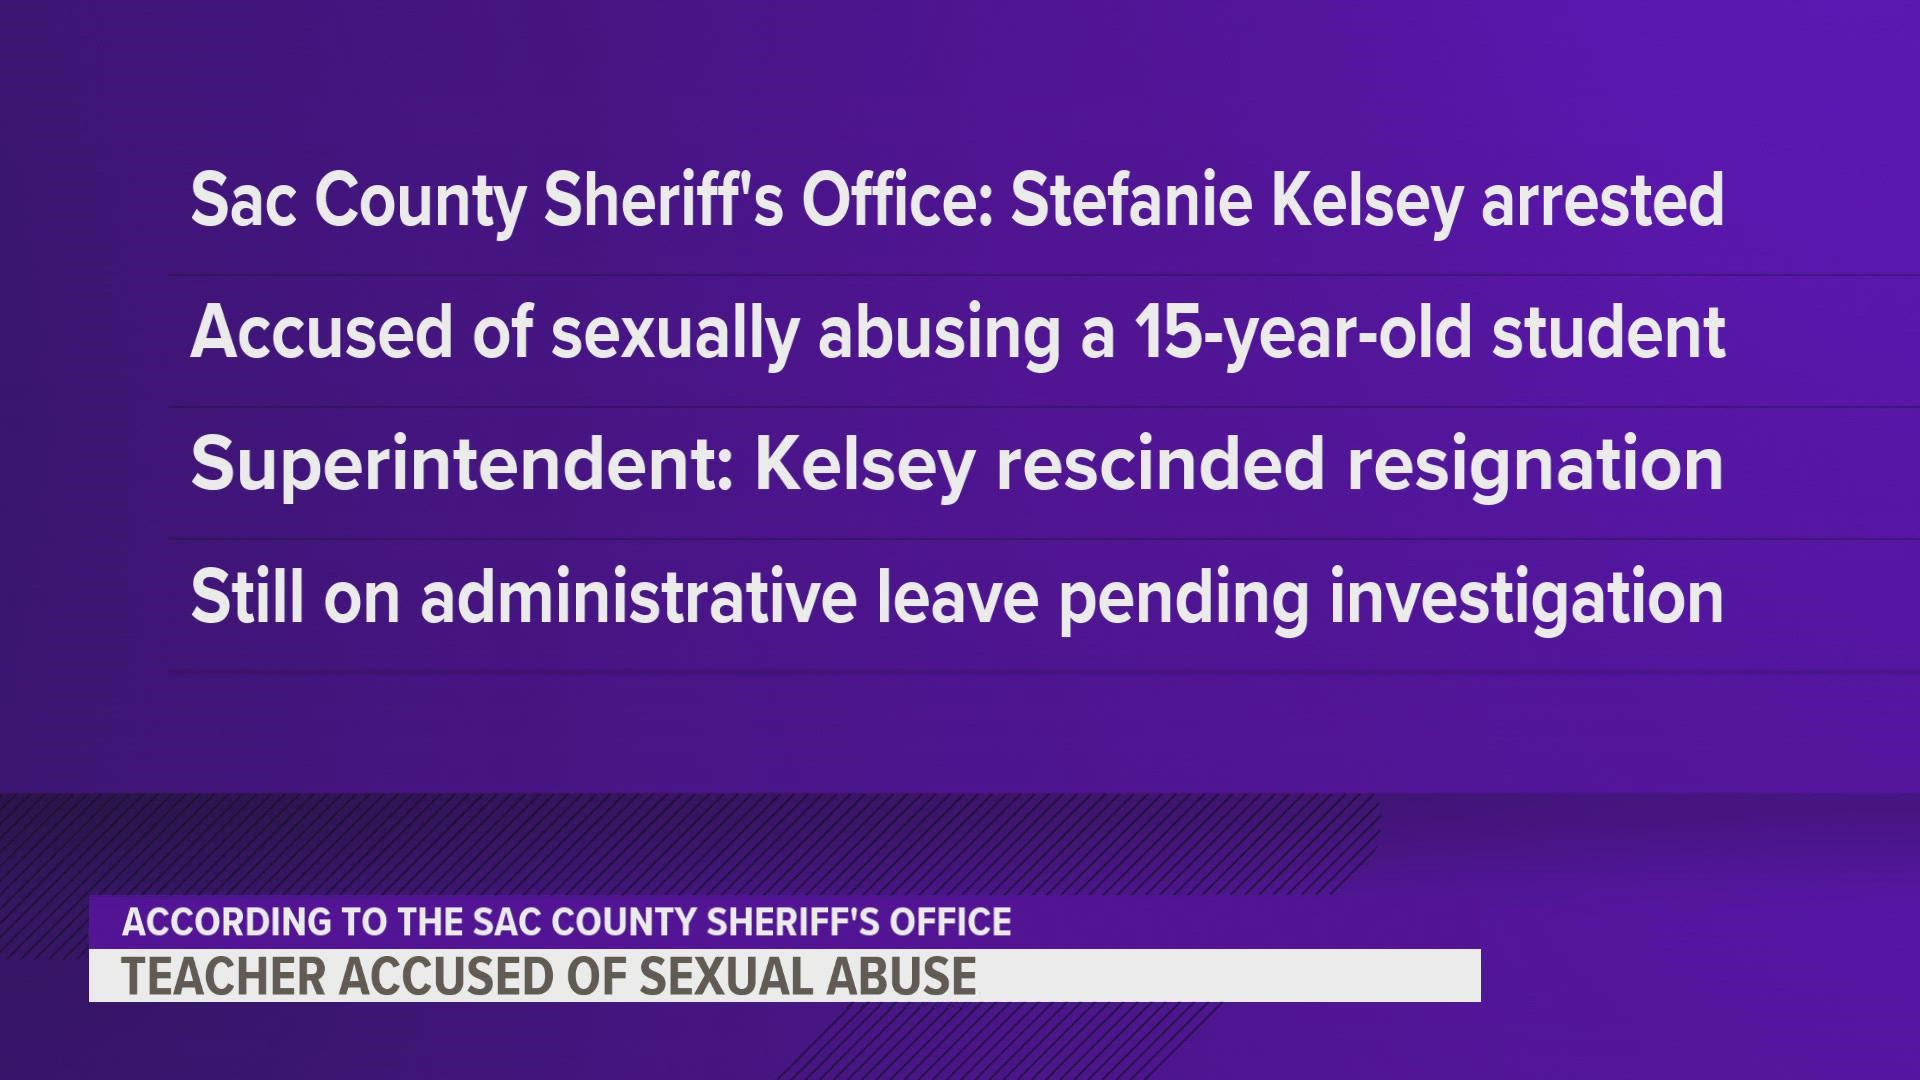 Officials allege Stefanie Kelsey had been having a sexual relationship with a 15-year-old student.